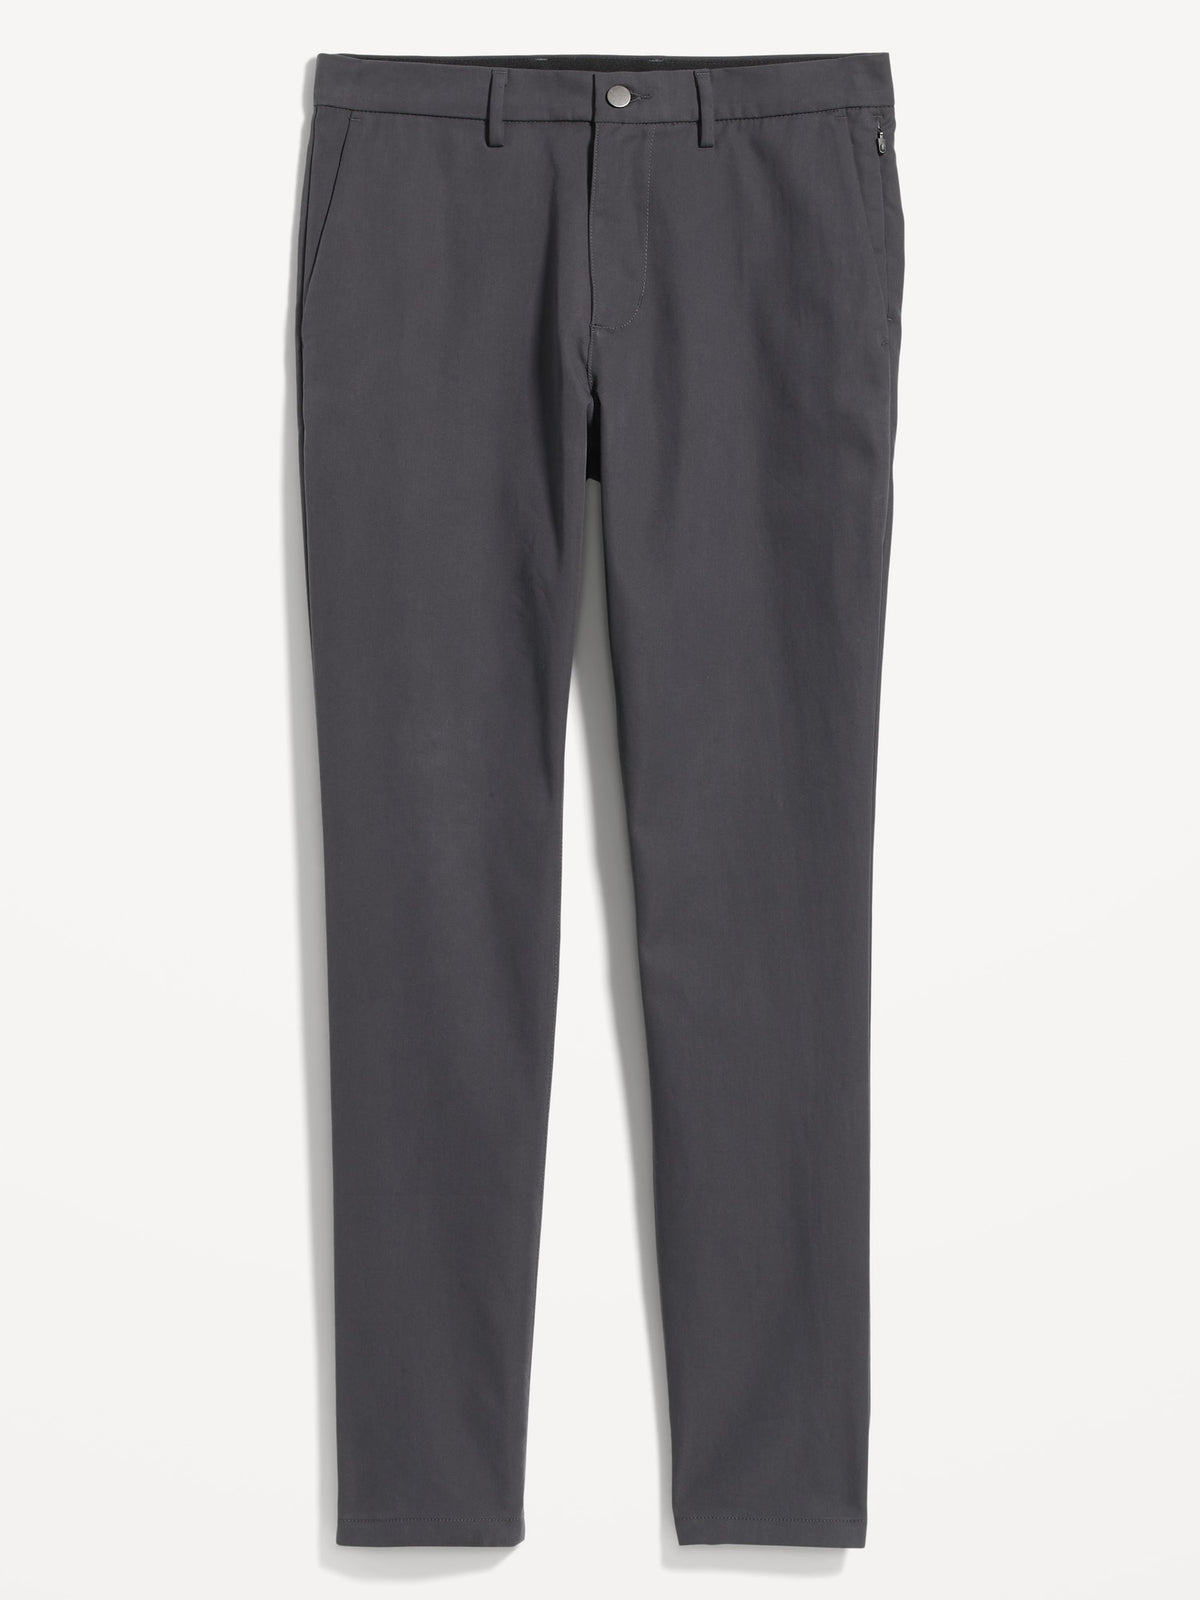 Old Navy Straight Ultimate Tech BuiltIn Flex Chino Pants for Men   Southcentre Mall